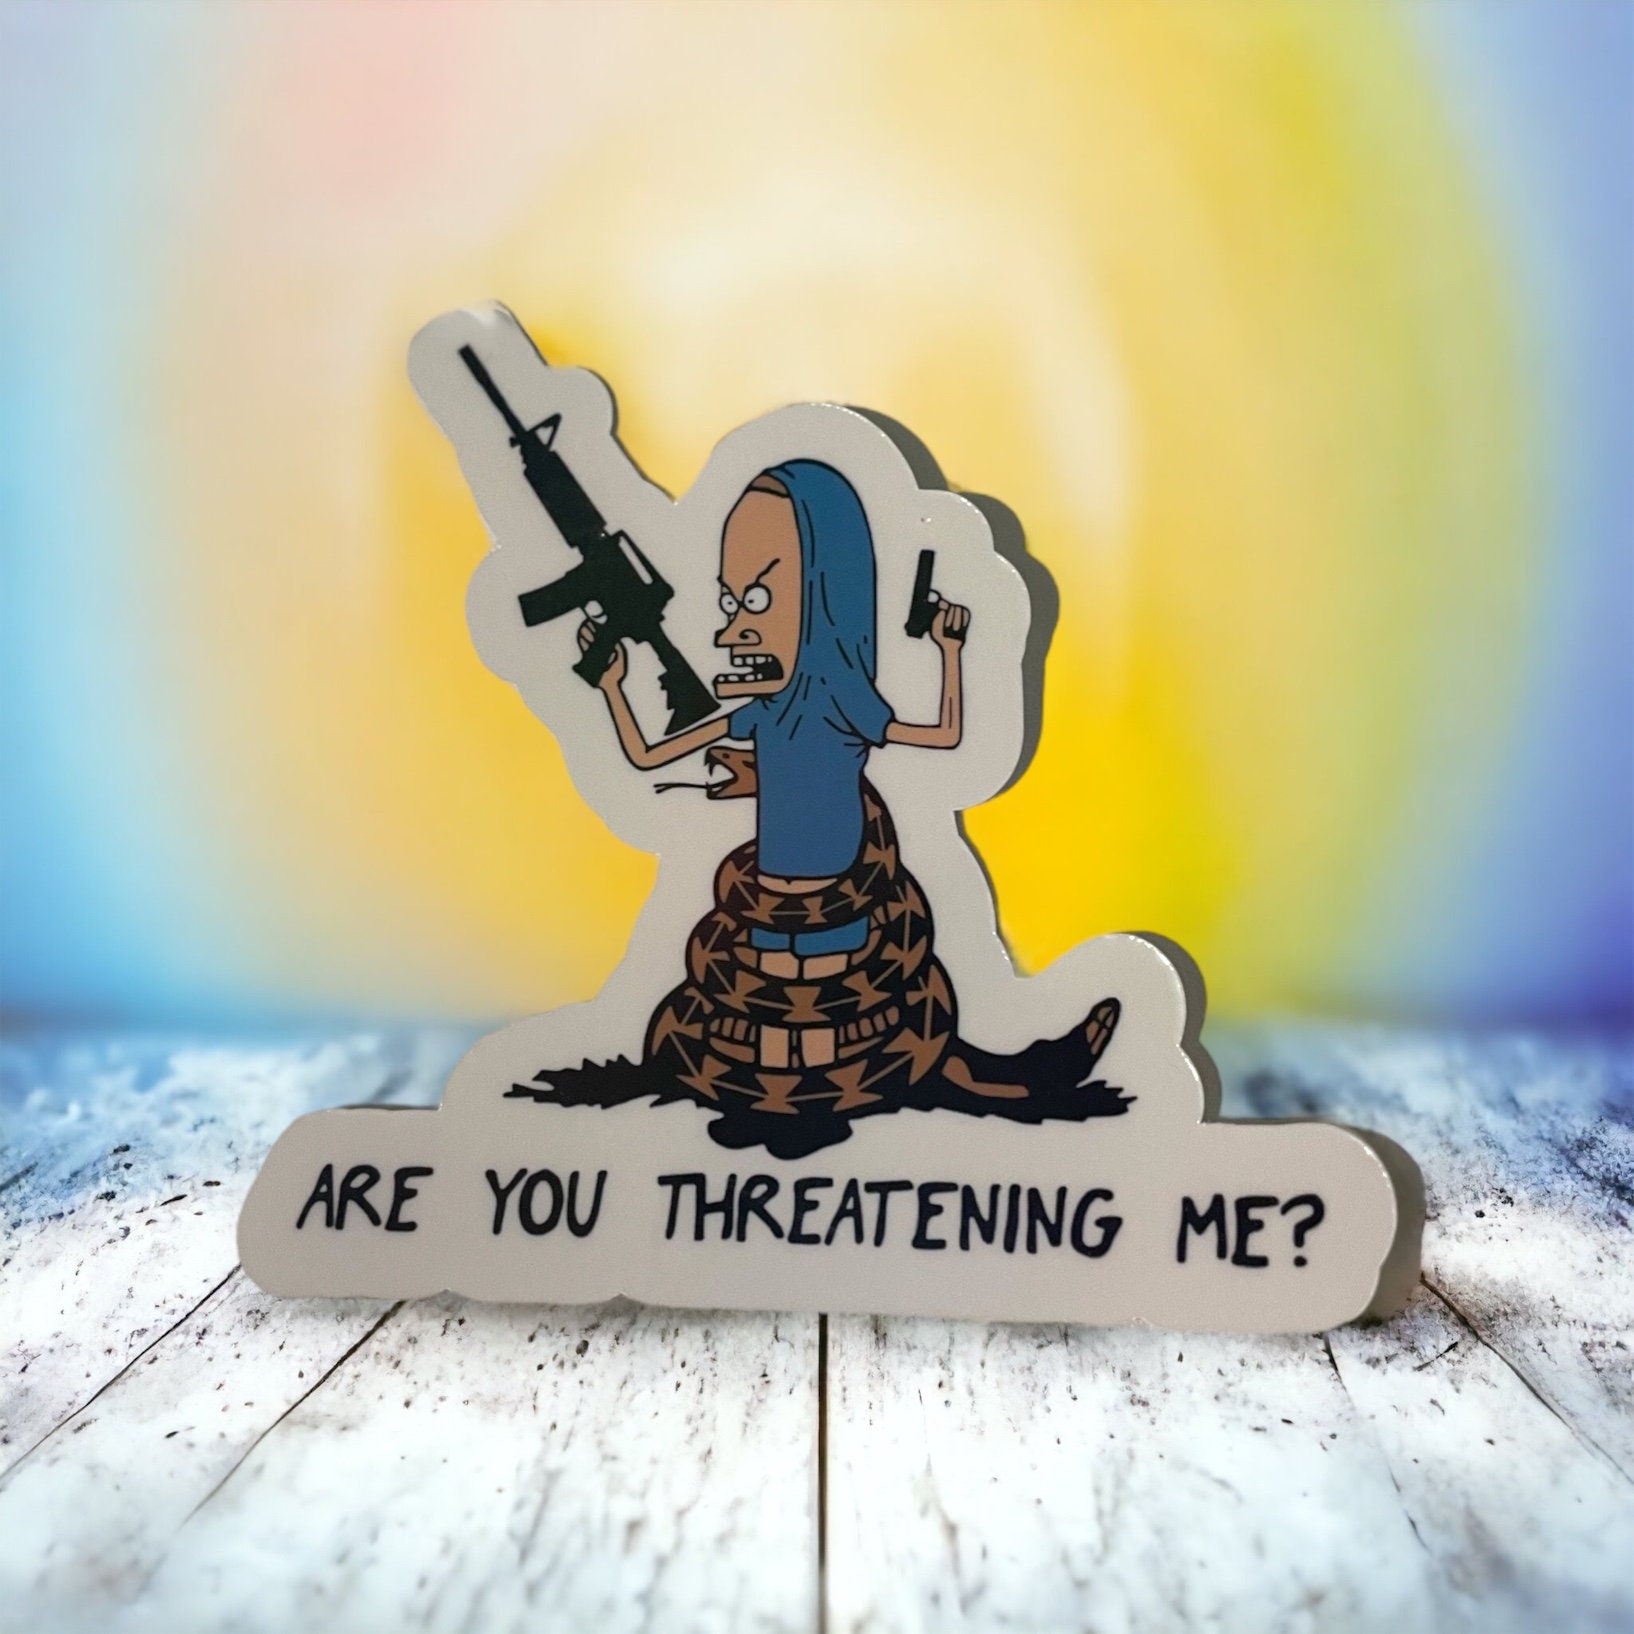 Beavis and Butt-Head Tactical Morale Patch